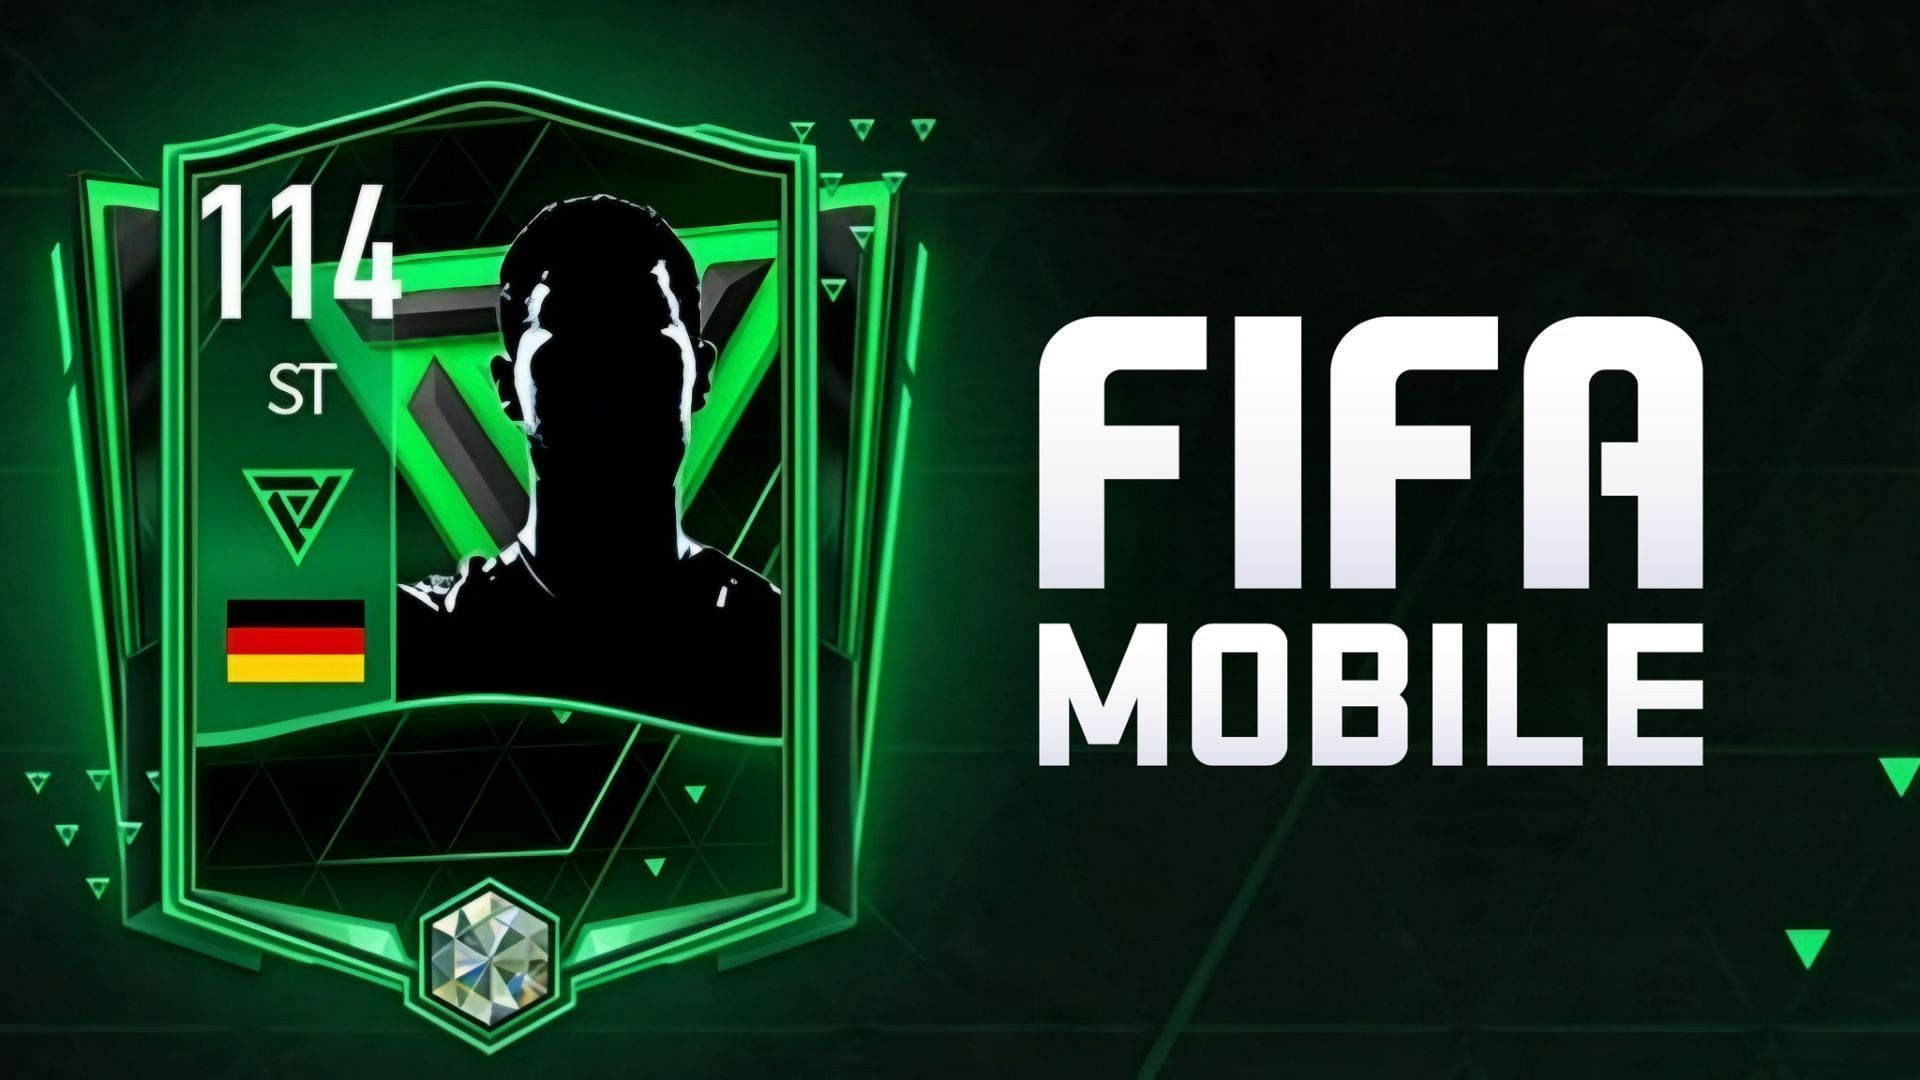 A free Pioneer player can be obtained from the Founders Event in FIFA Mobile (Image via Sportskeeda) 